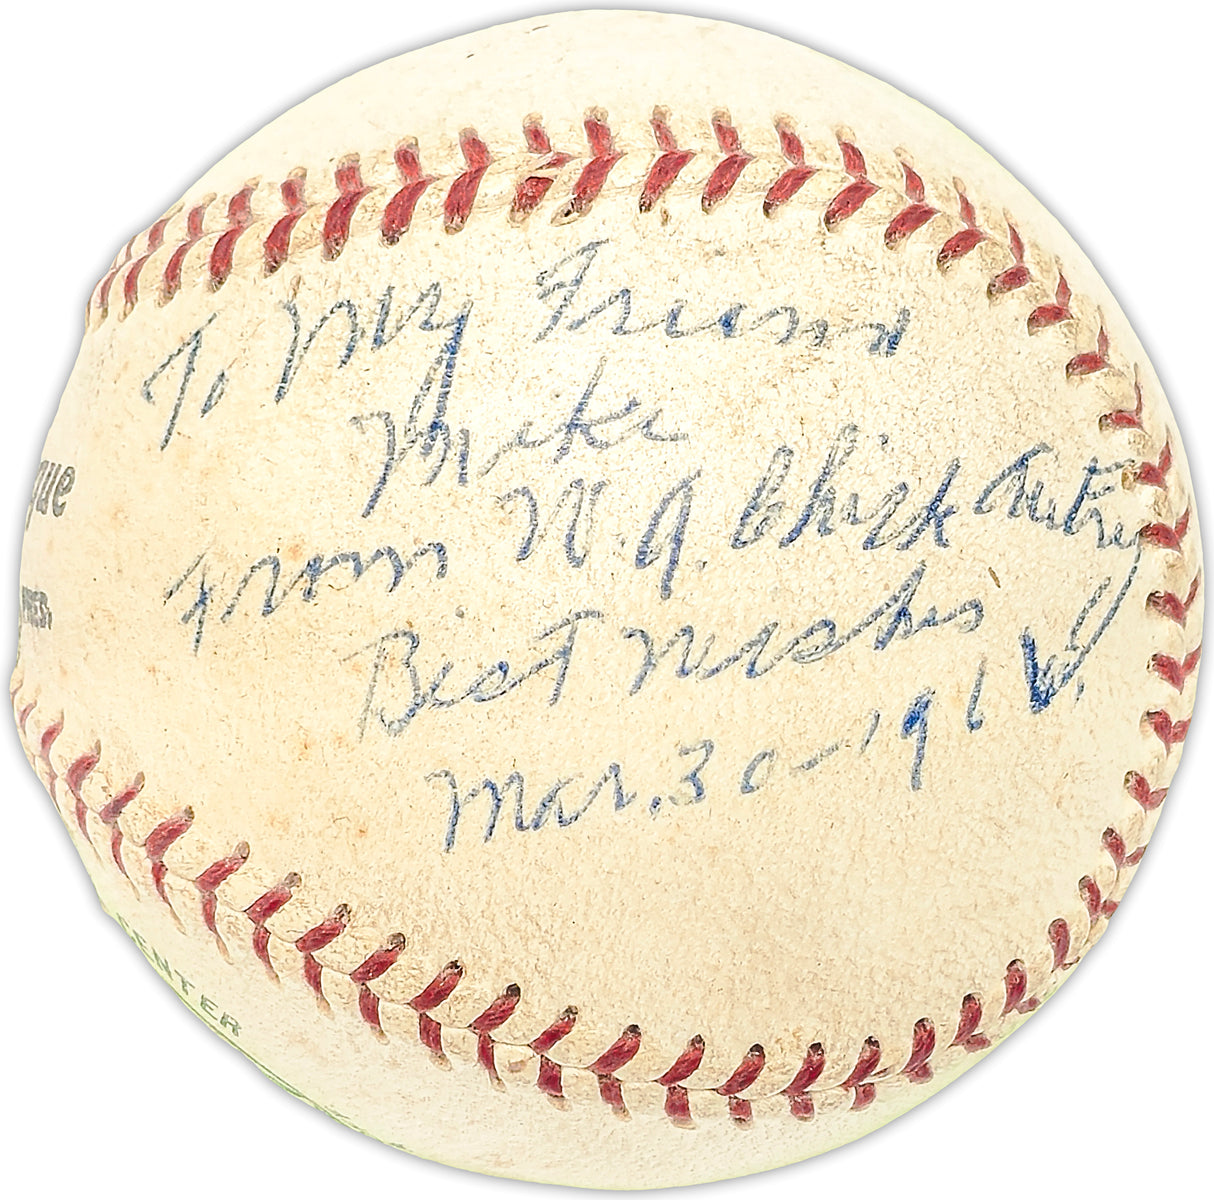 W.A. "Chick" Autry Autographed Official Giles NL Baseball Cincinnati Reds "To My Friend Mike Best Wishes Mar. 30, 1961" Died 1976 PSA/DNA #G25322